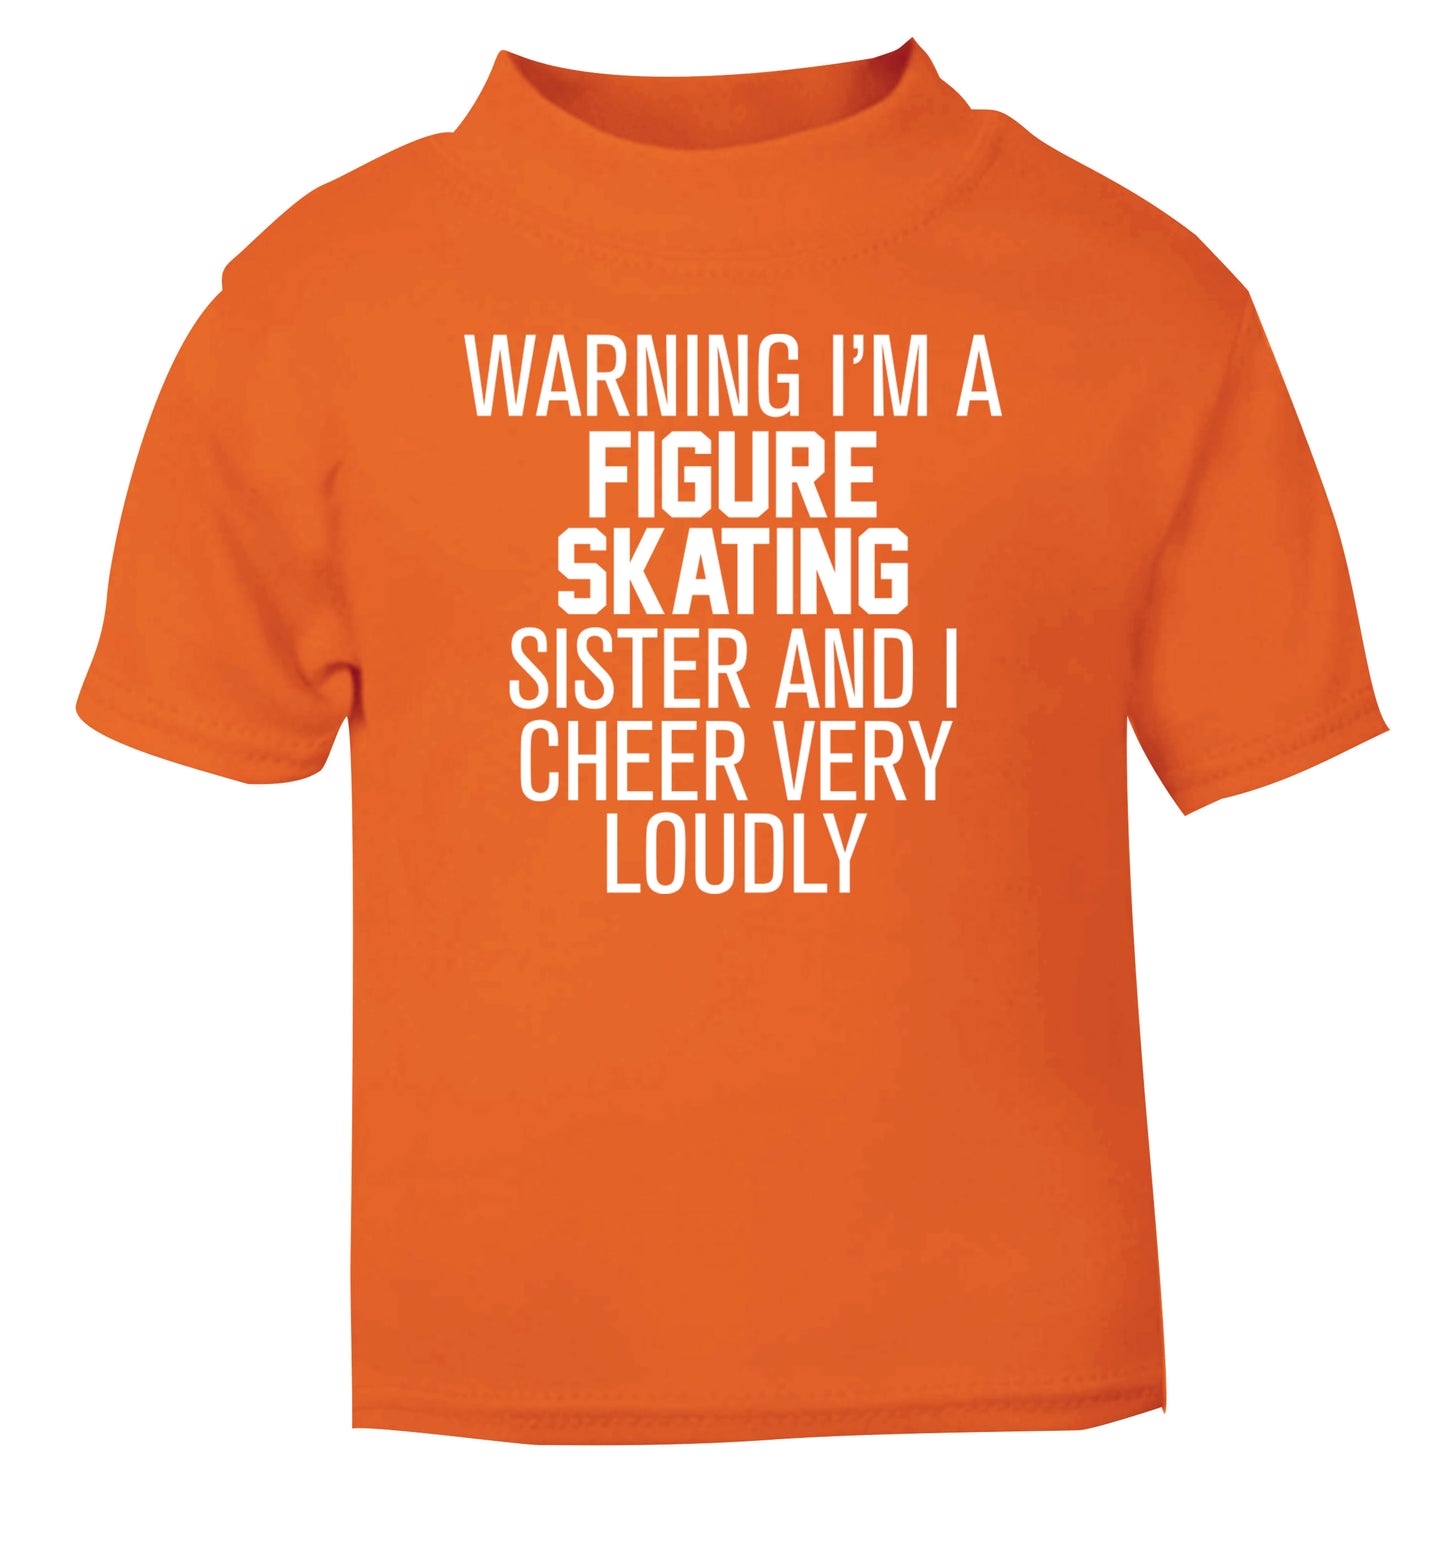 Warning I'm a figure skating sister and I cheer very loudly orange Baby Toddler Tshirt 2 Years